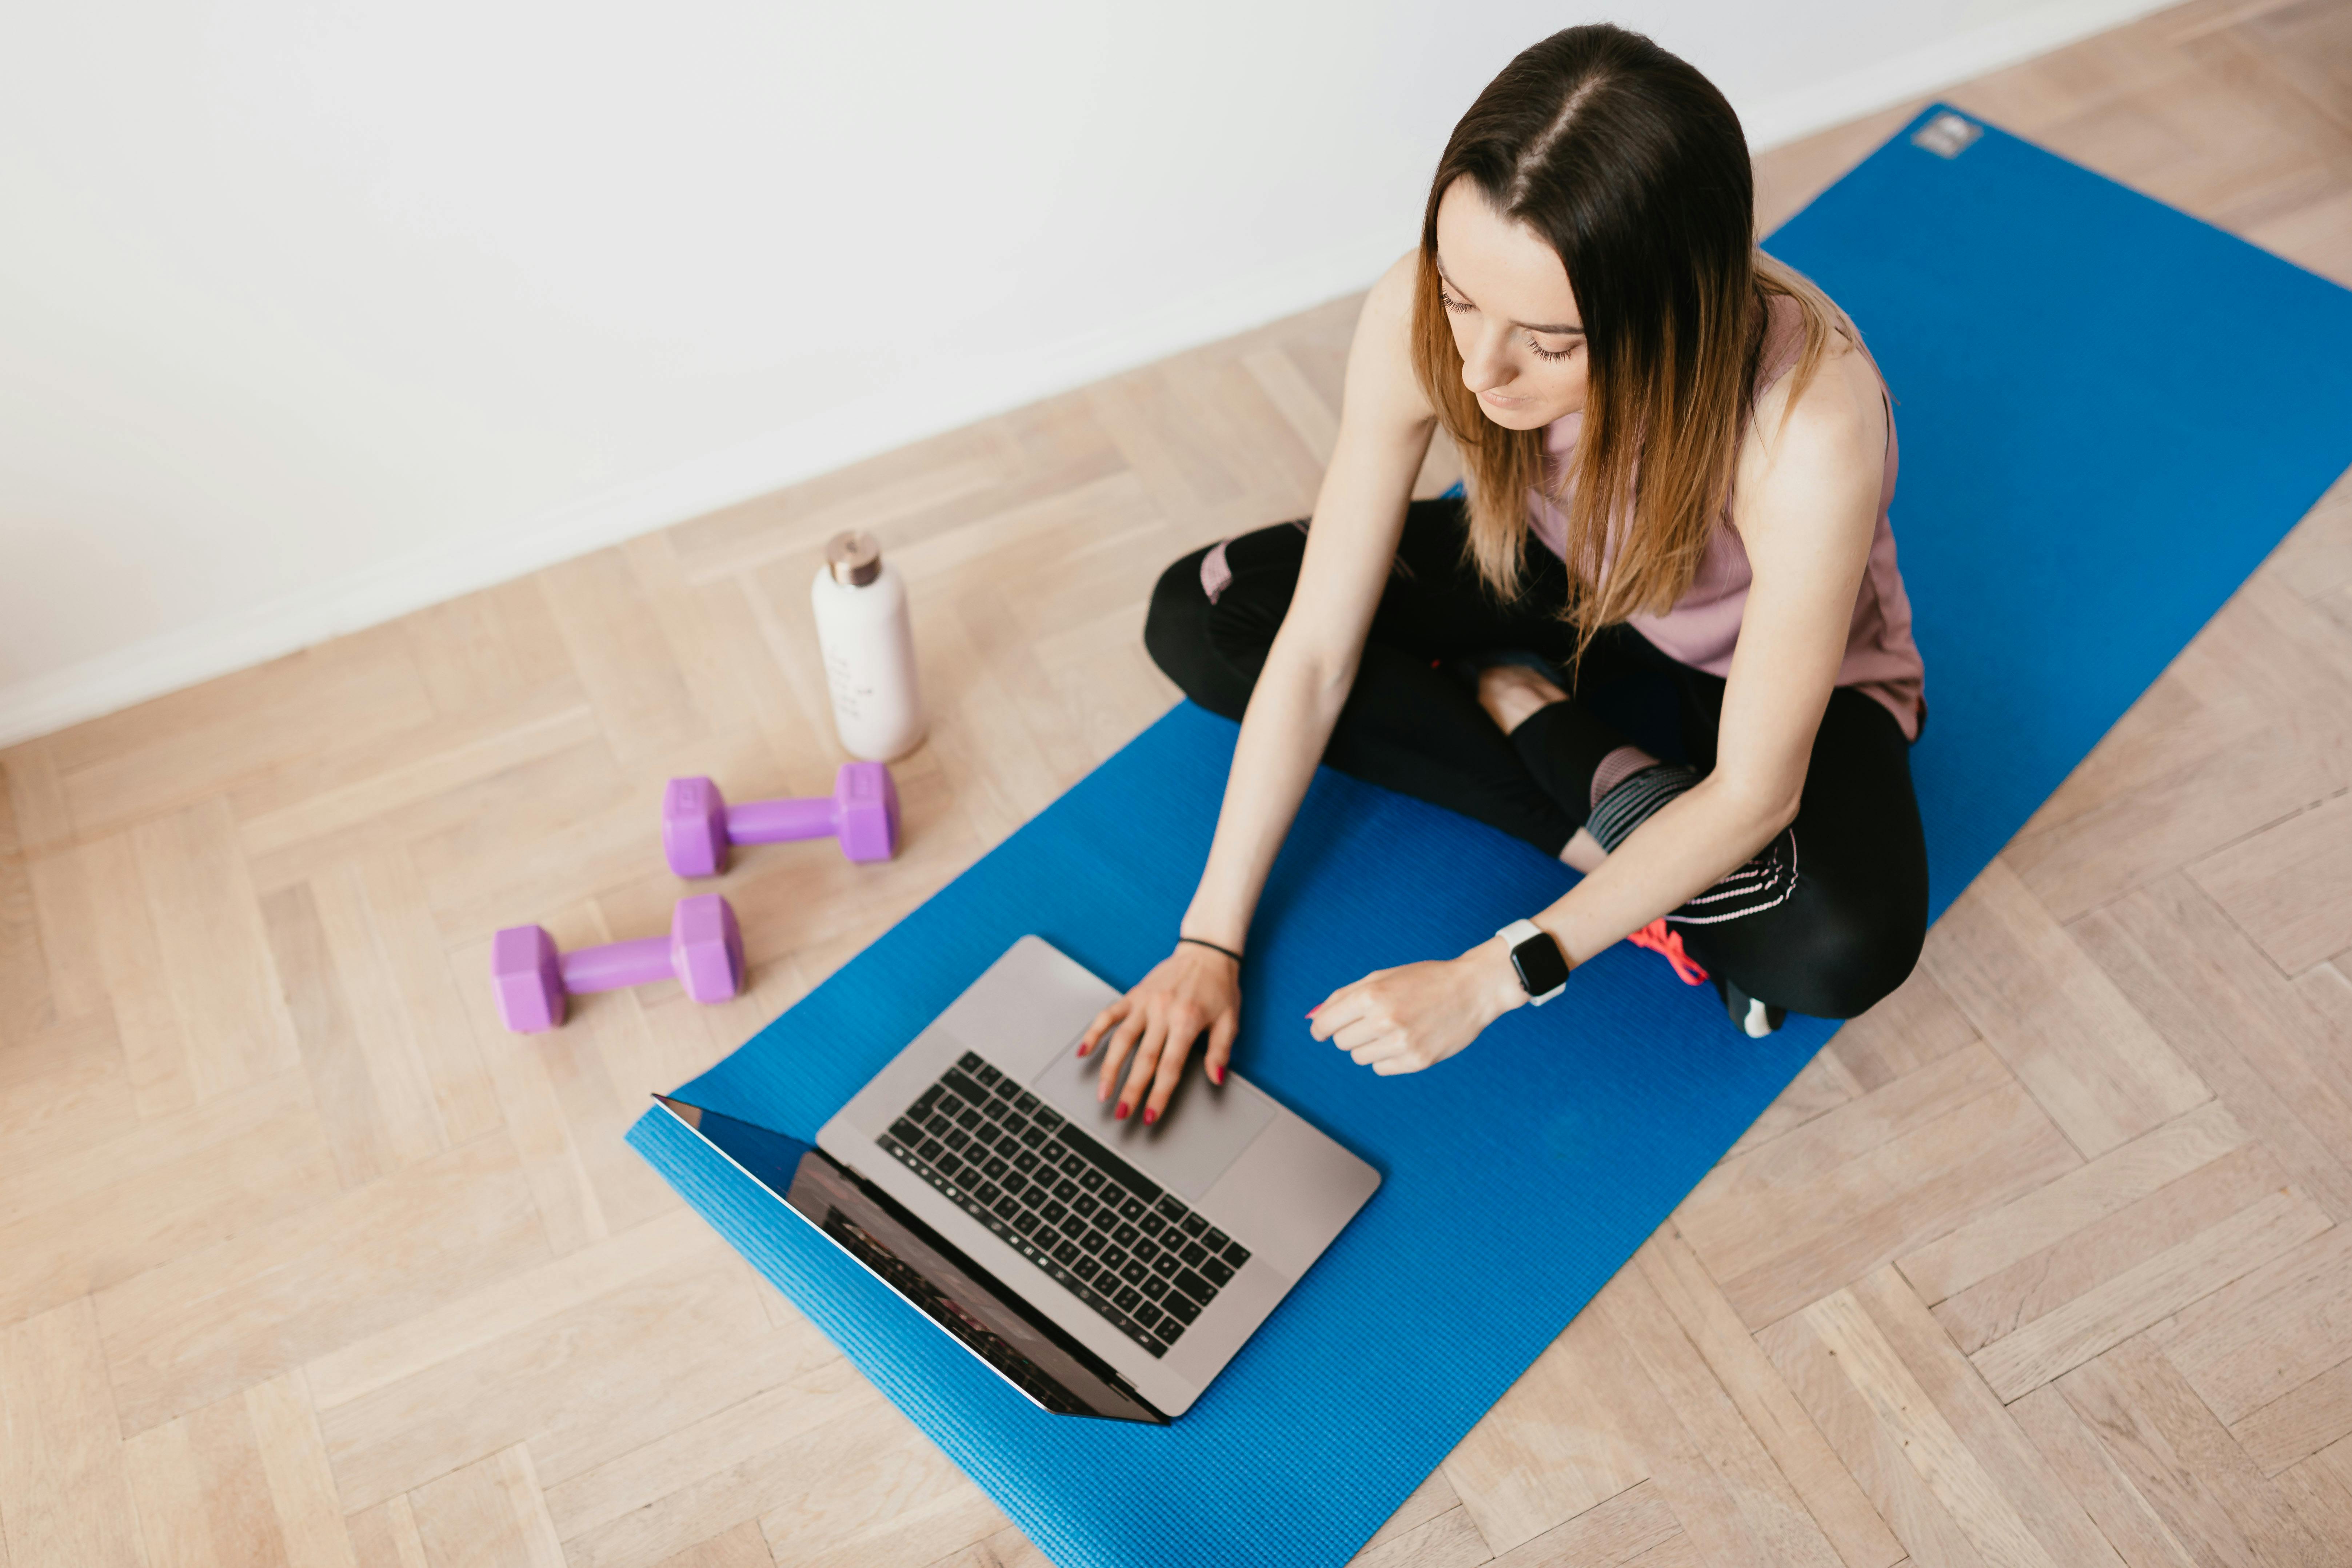  Wellness Programs That Support Remote Employees